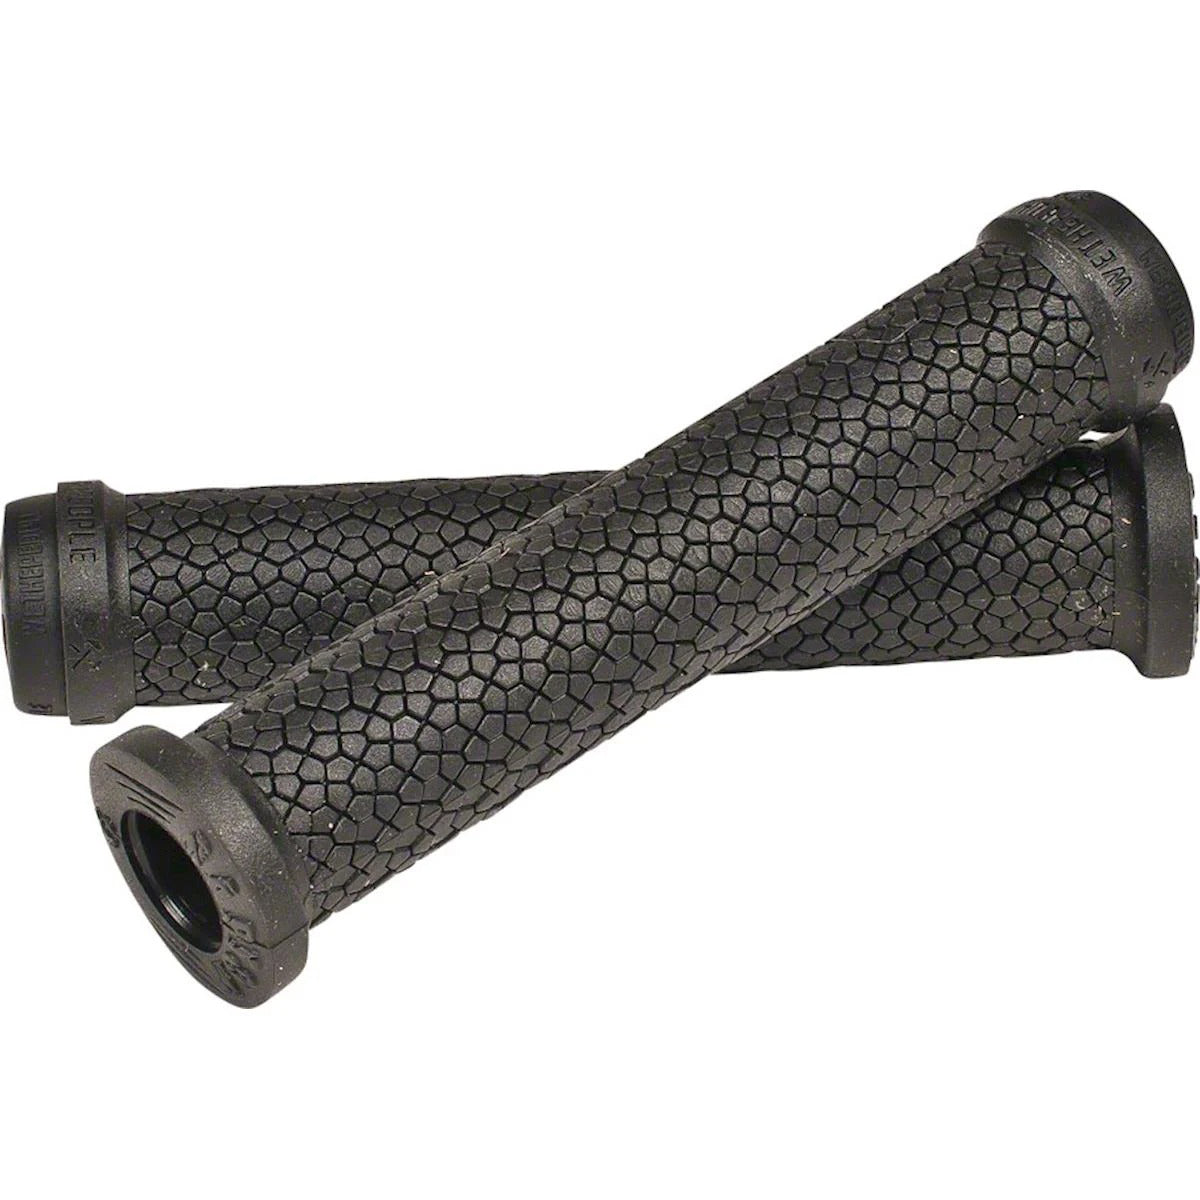 WE THE PEOPLE Rapter Grips